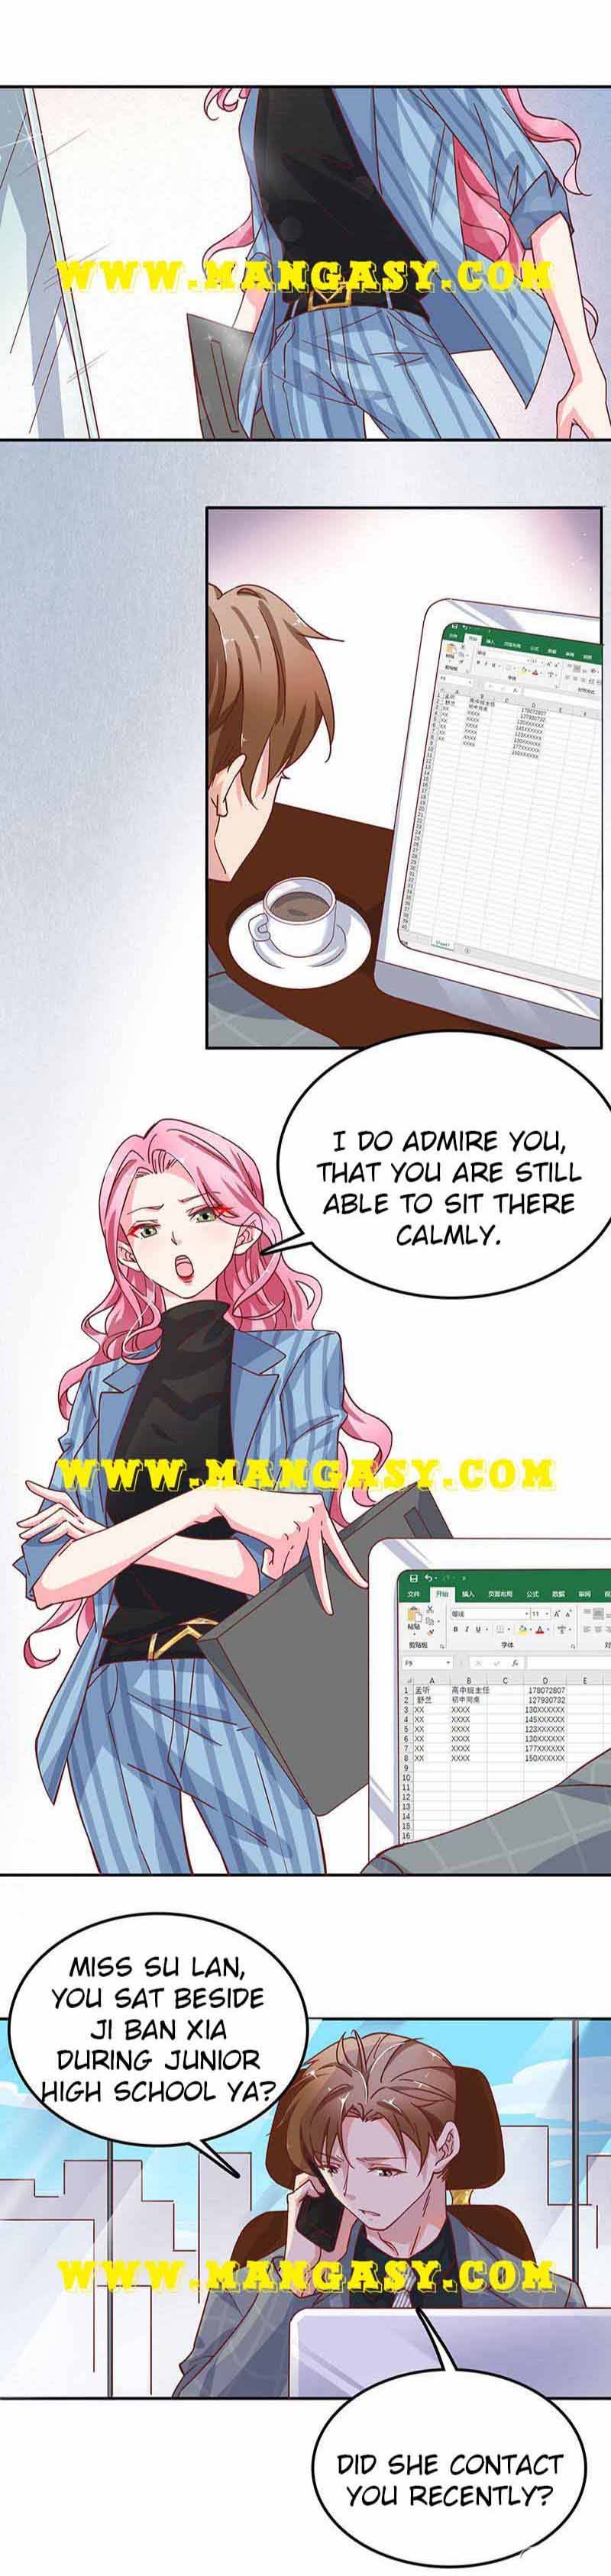 Love You By Mistake - chapter 51 - #3